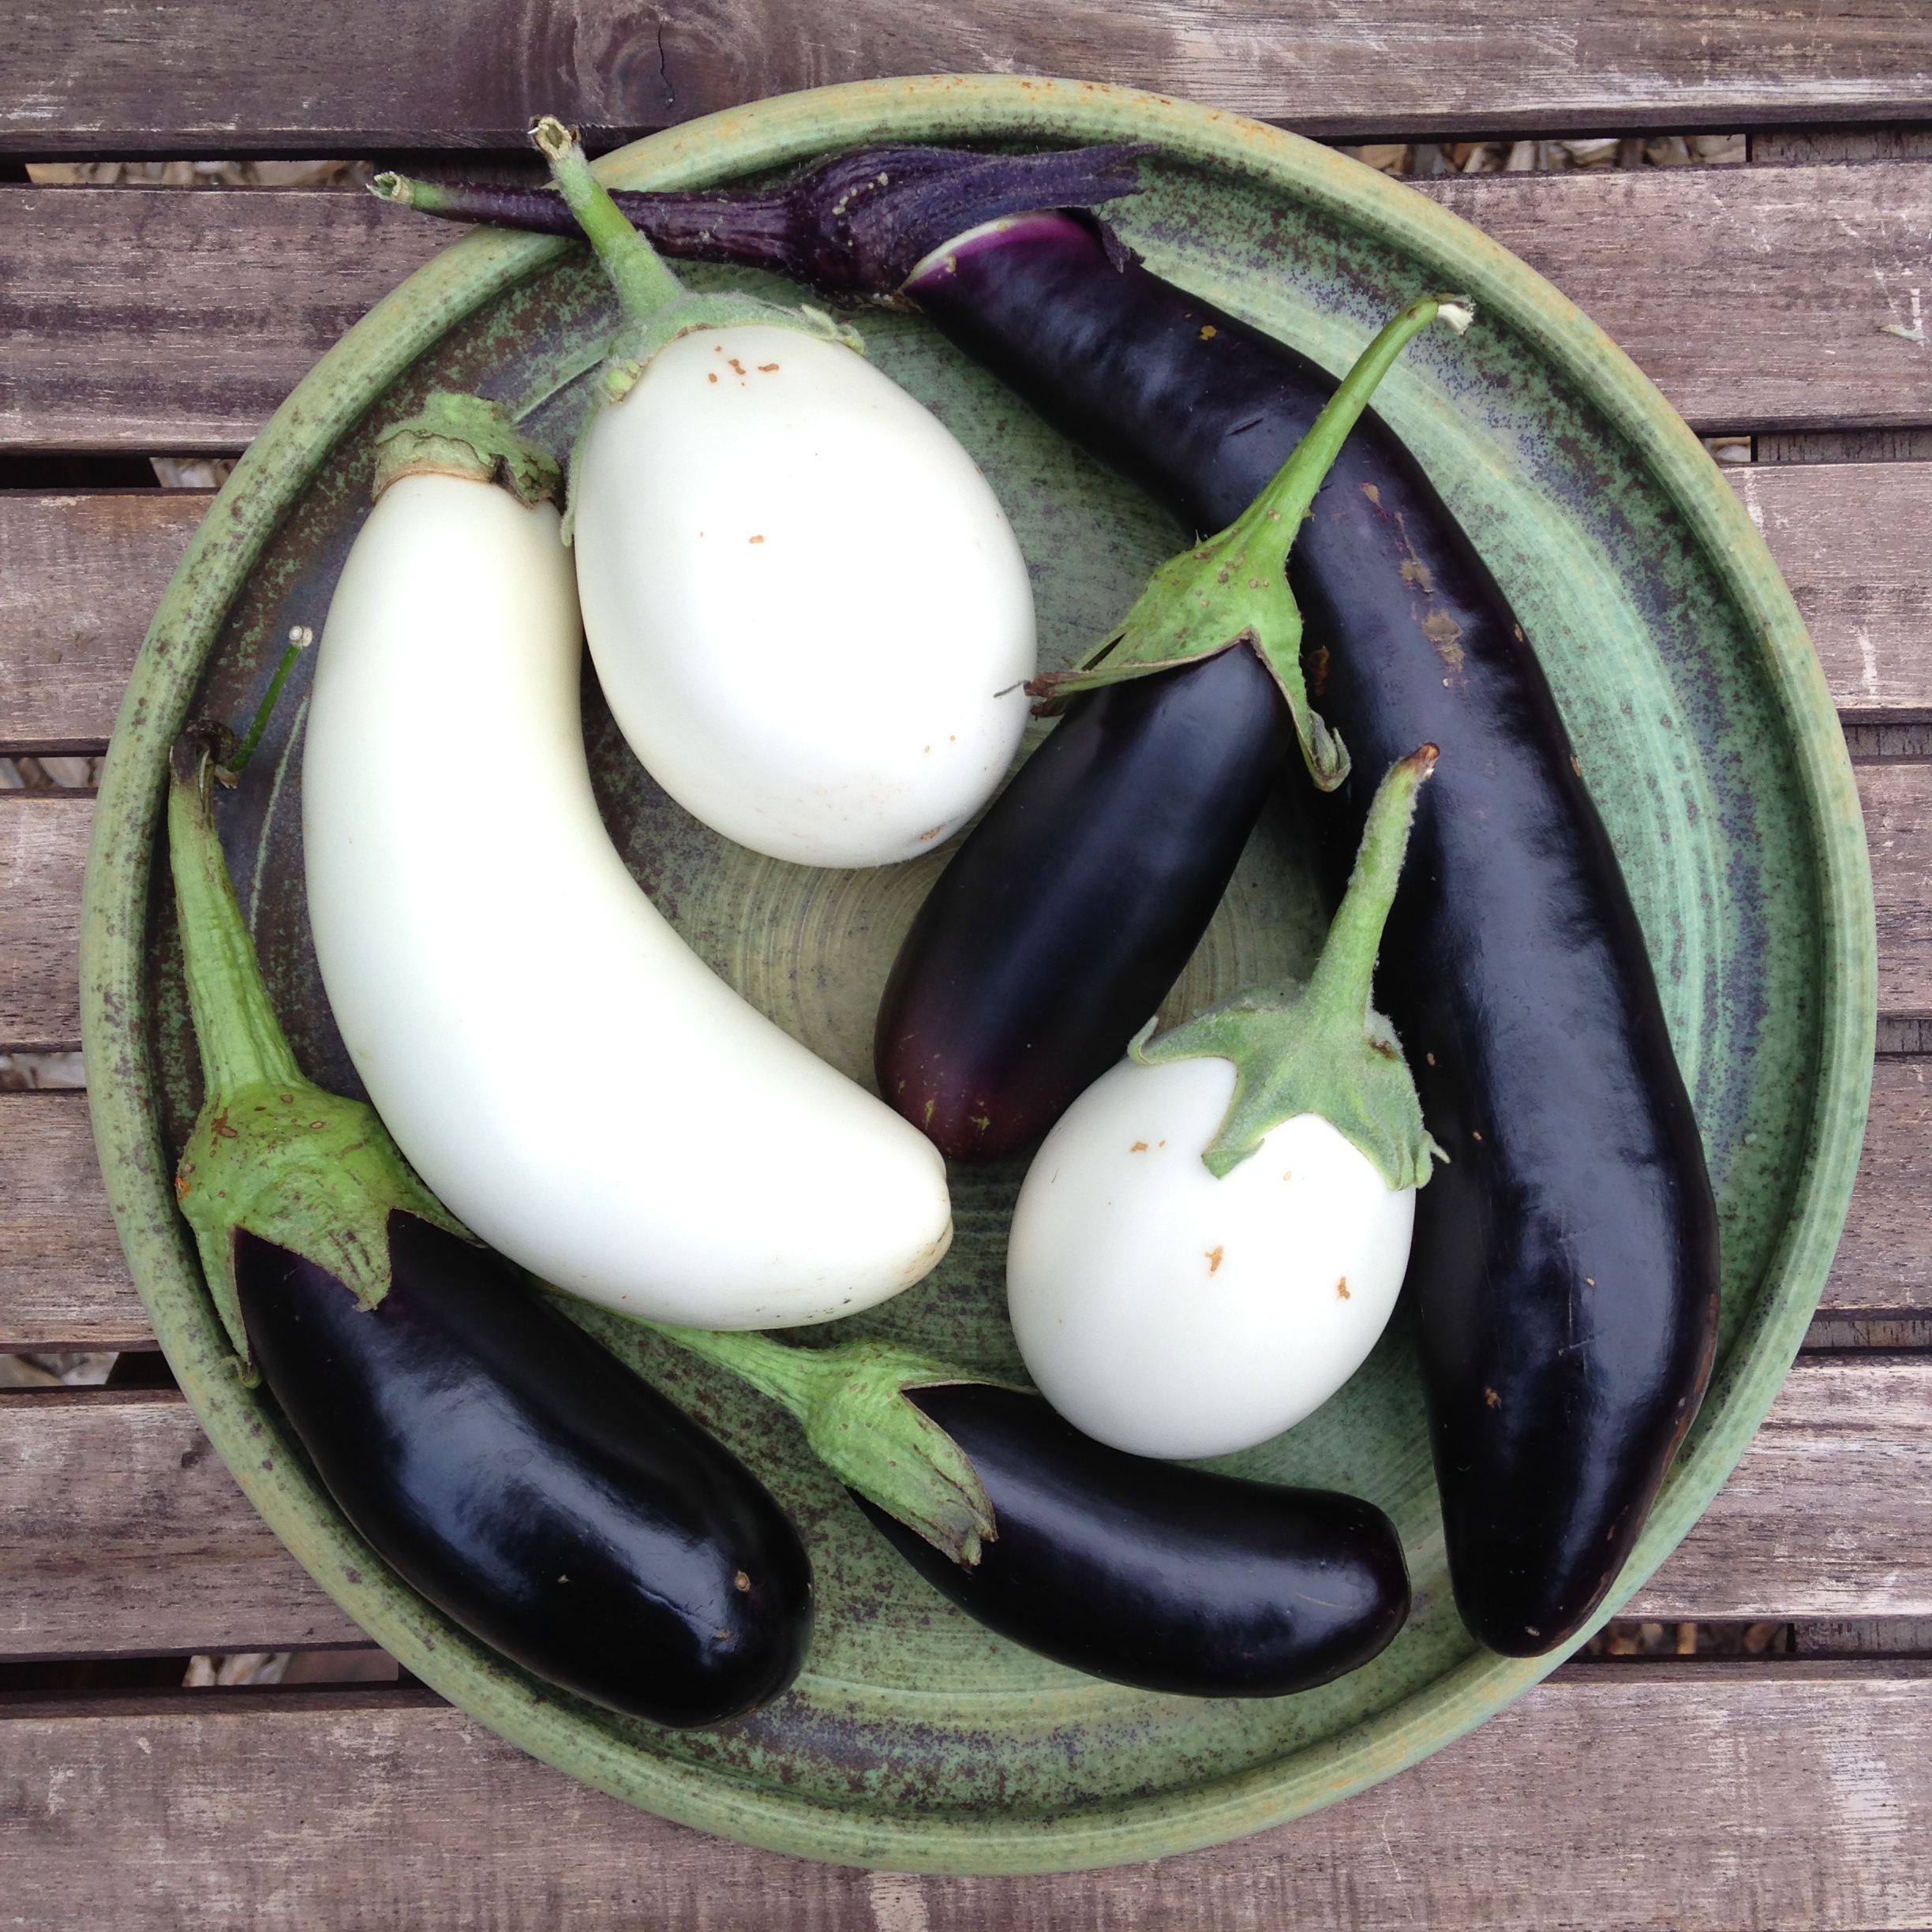 I have to admit that the eggplant has maintained an air of mystery in my li...